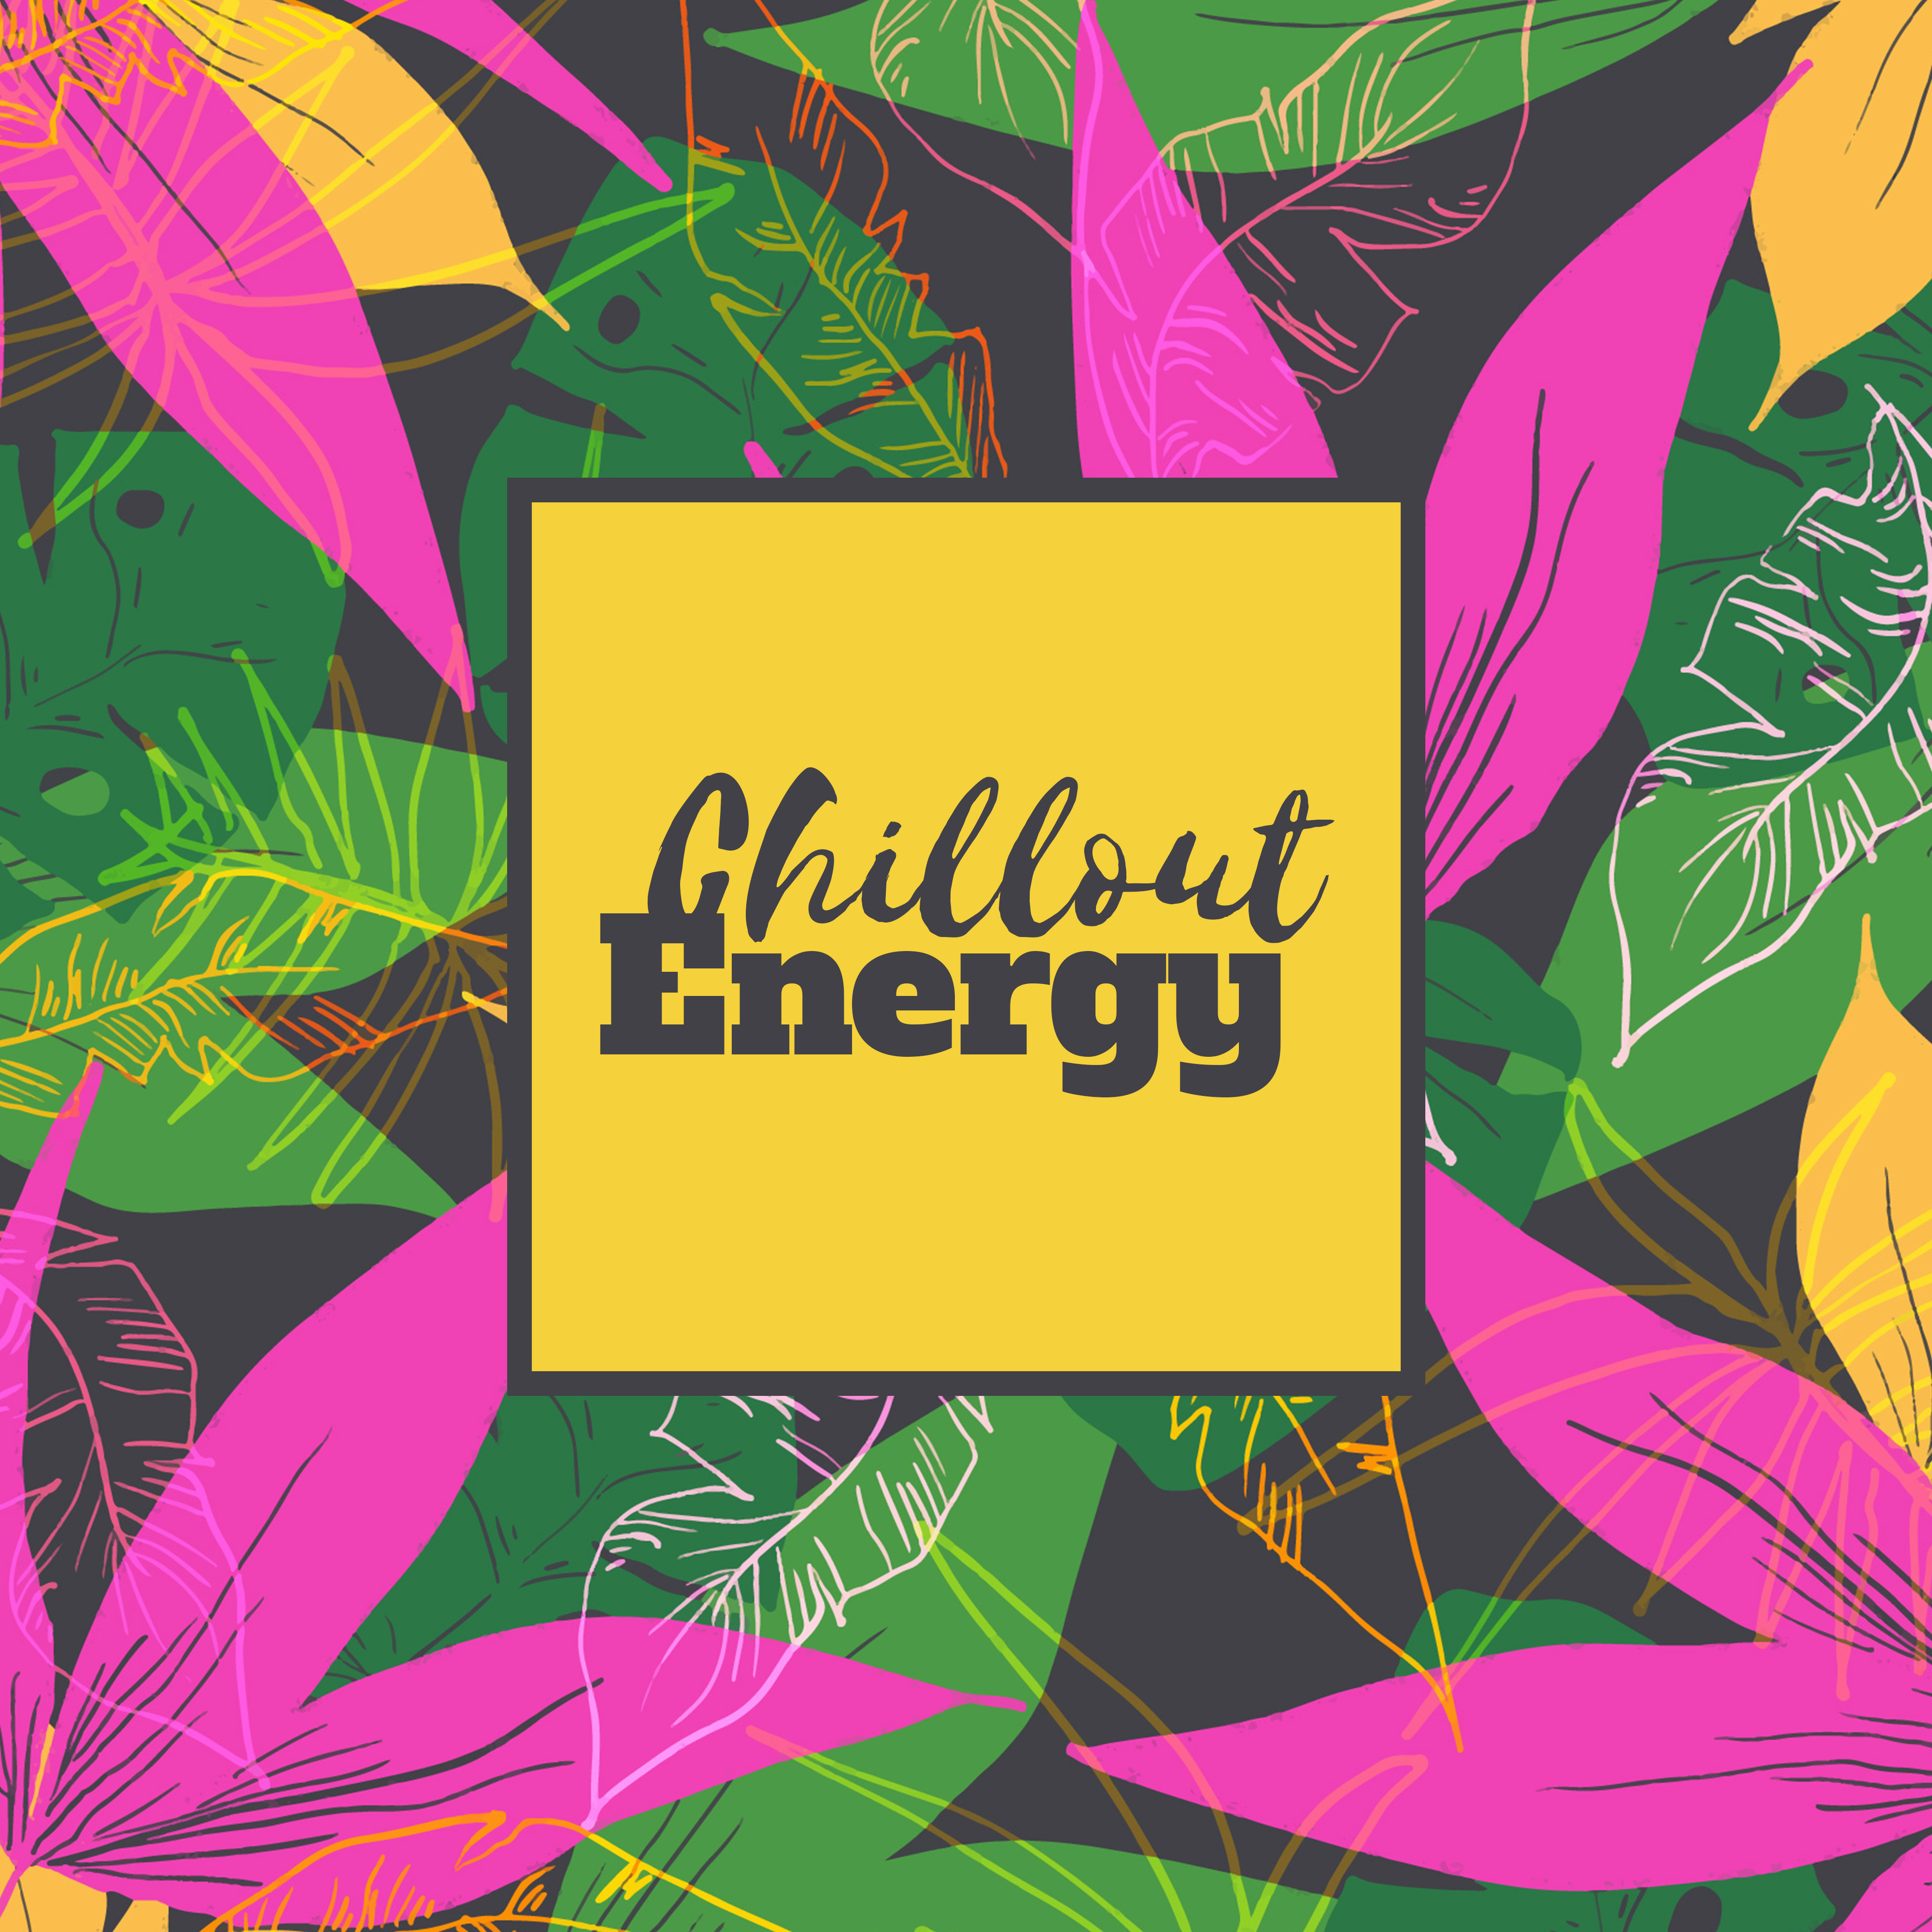 Chillout Energy